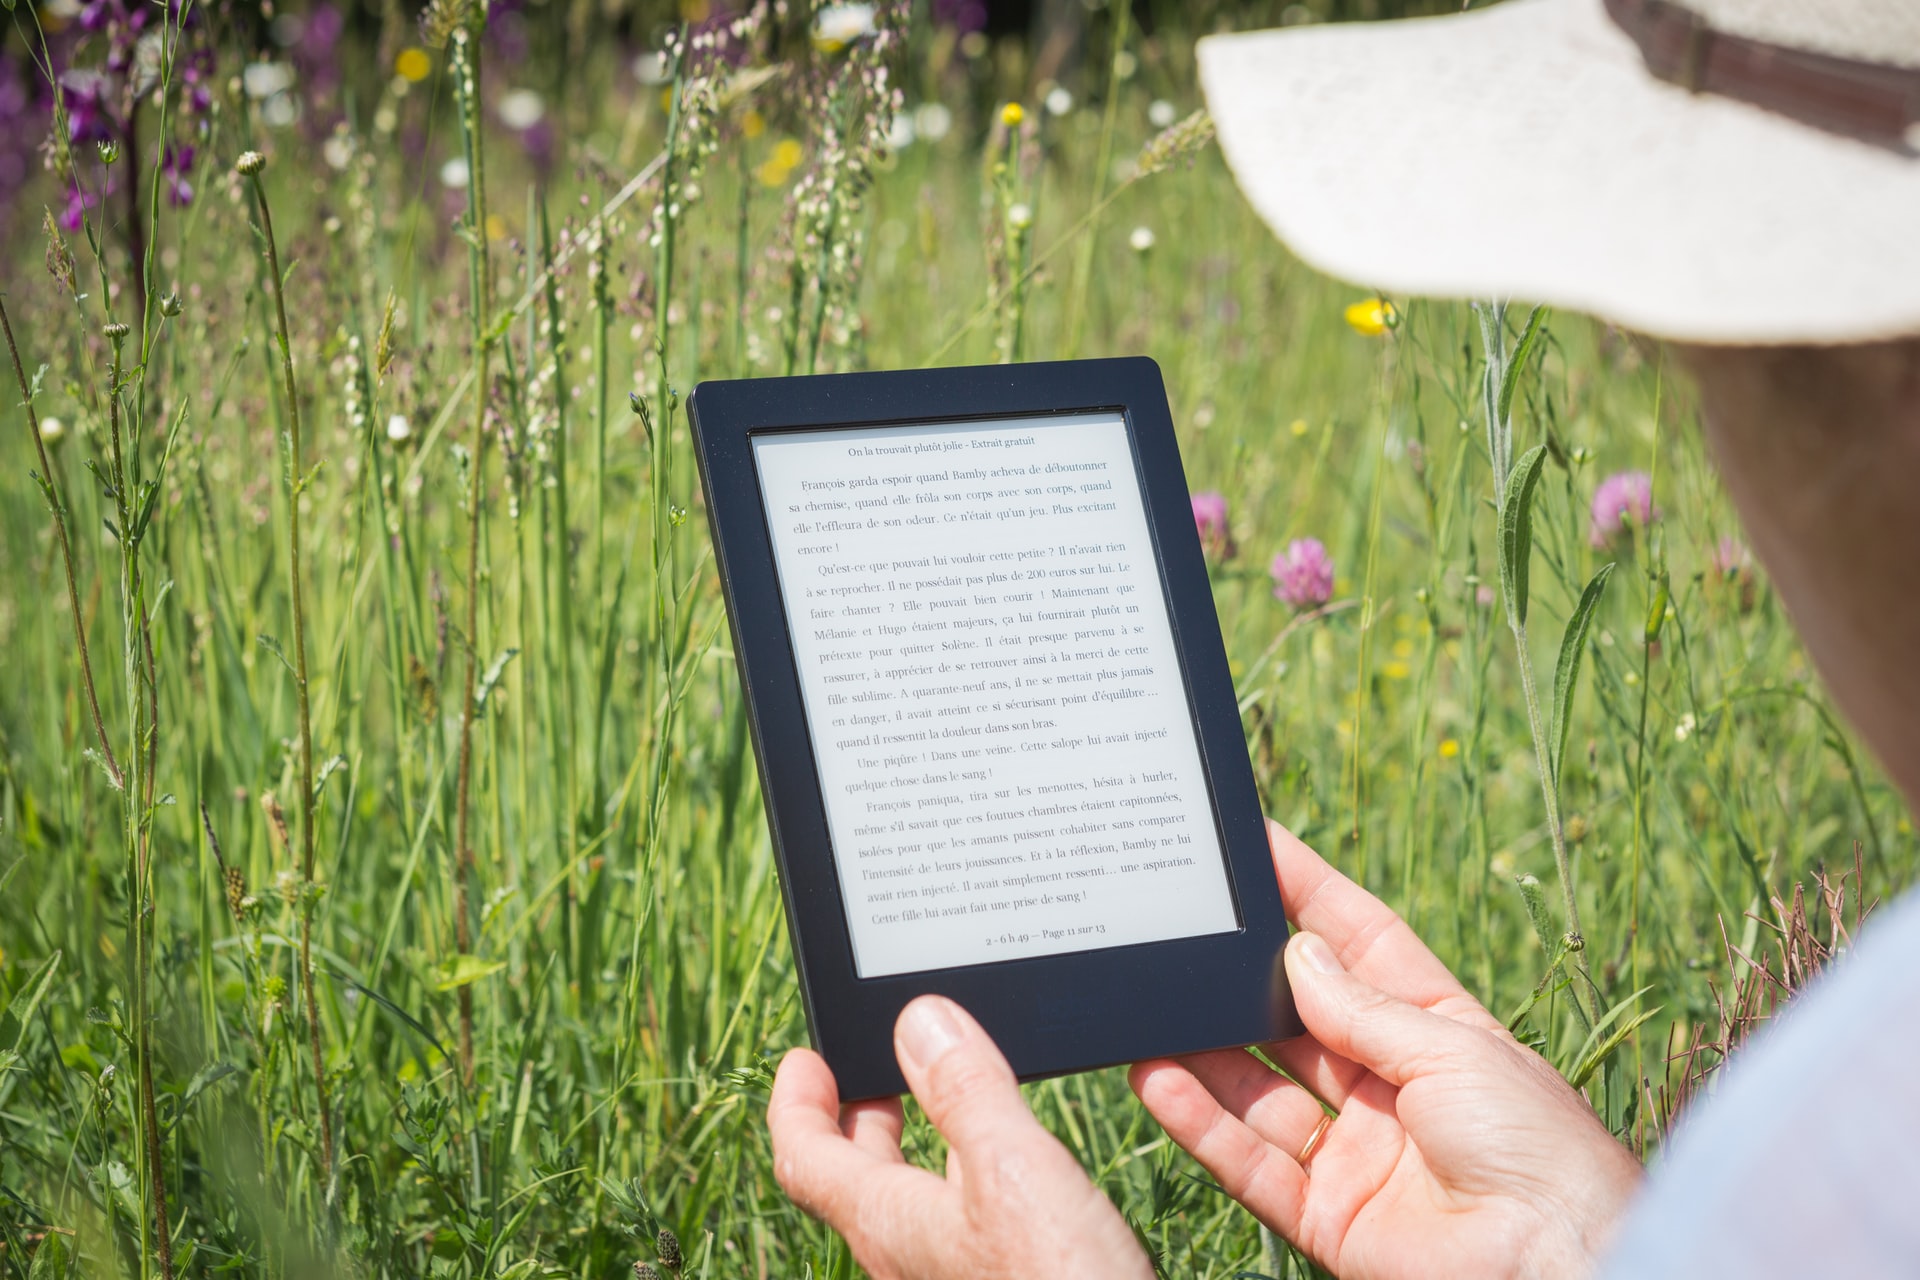 Free Kindle Books - How to Download